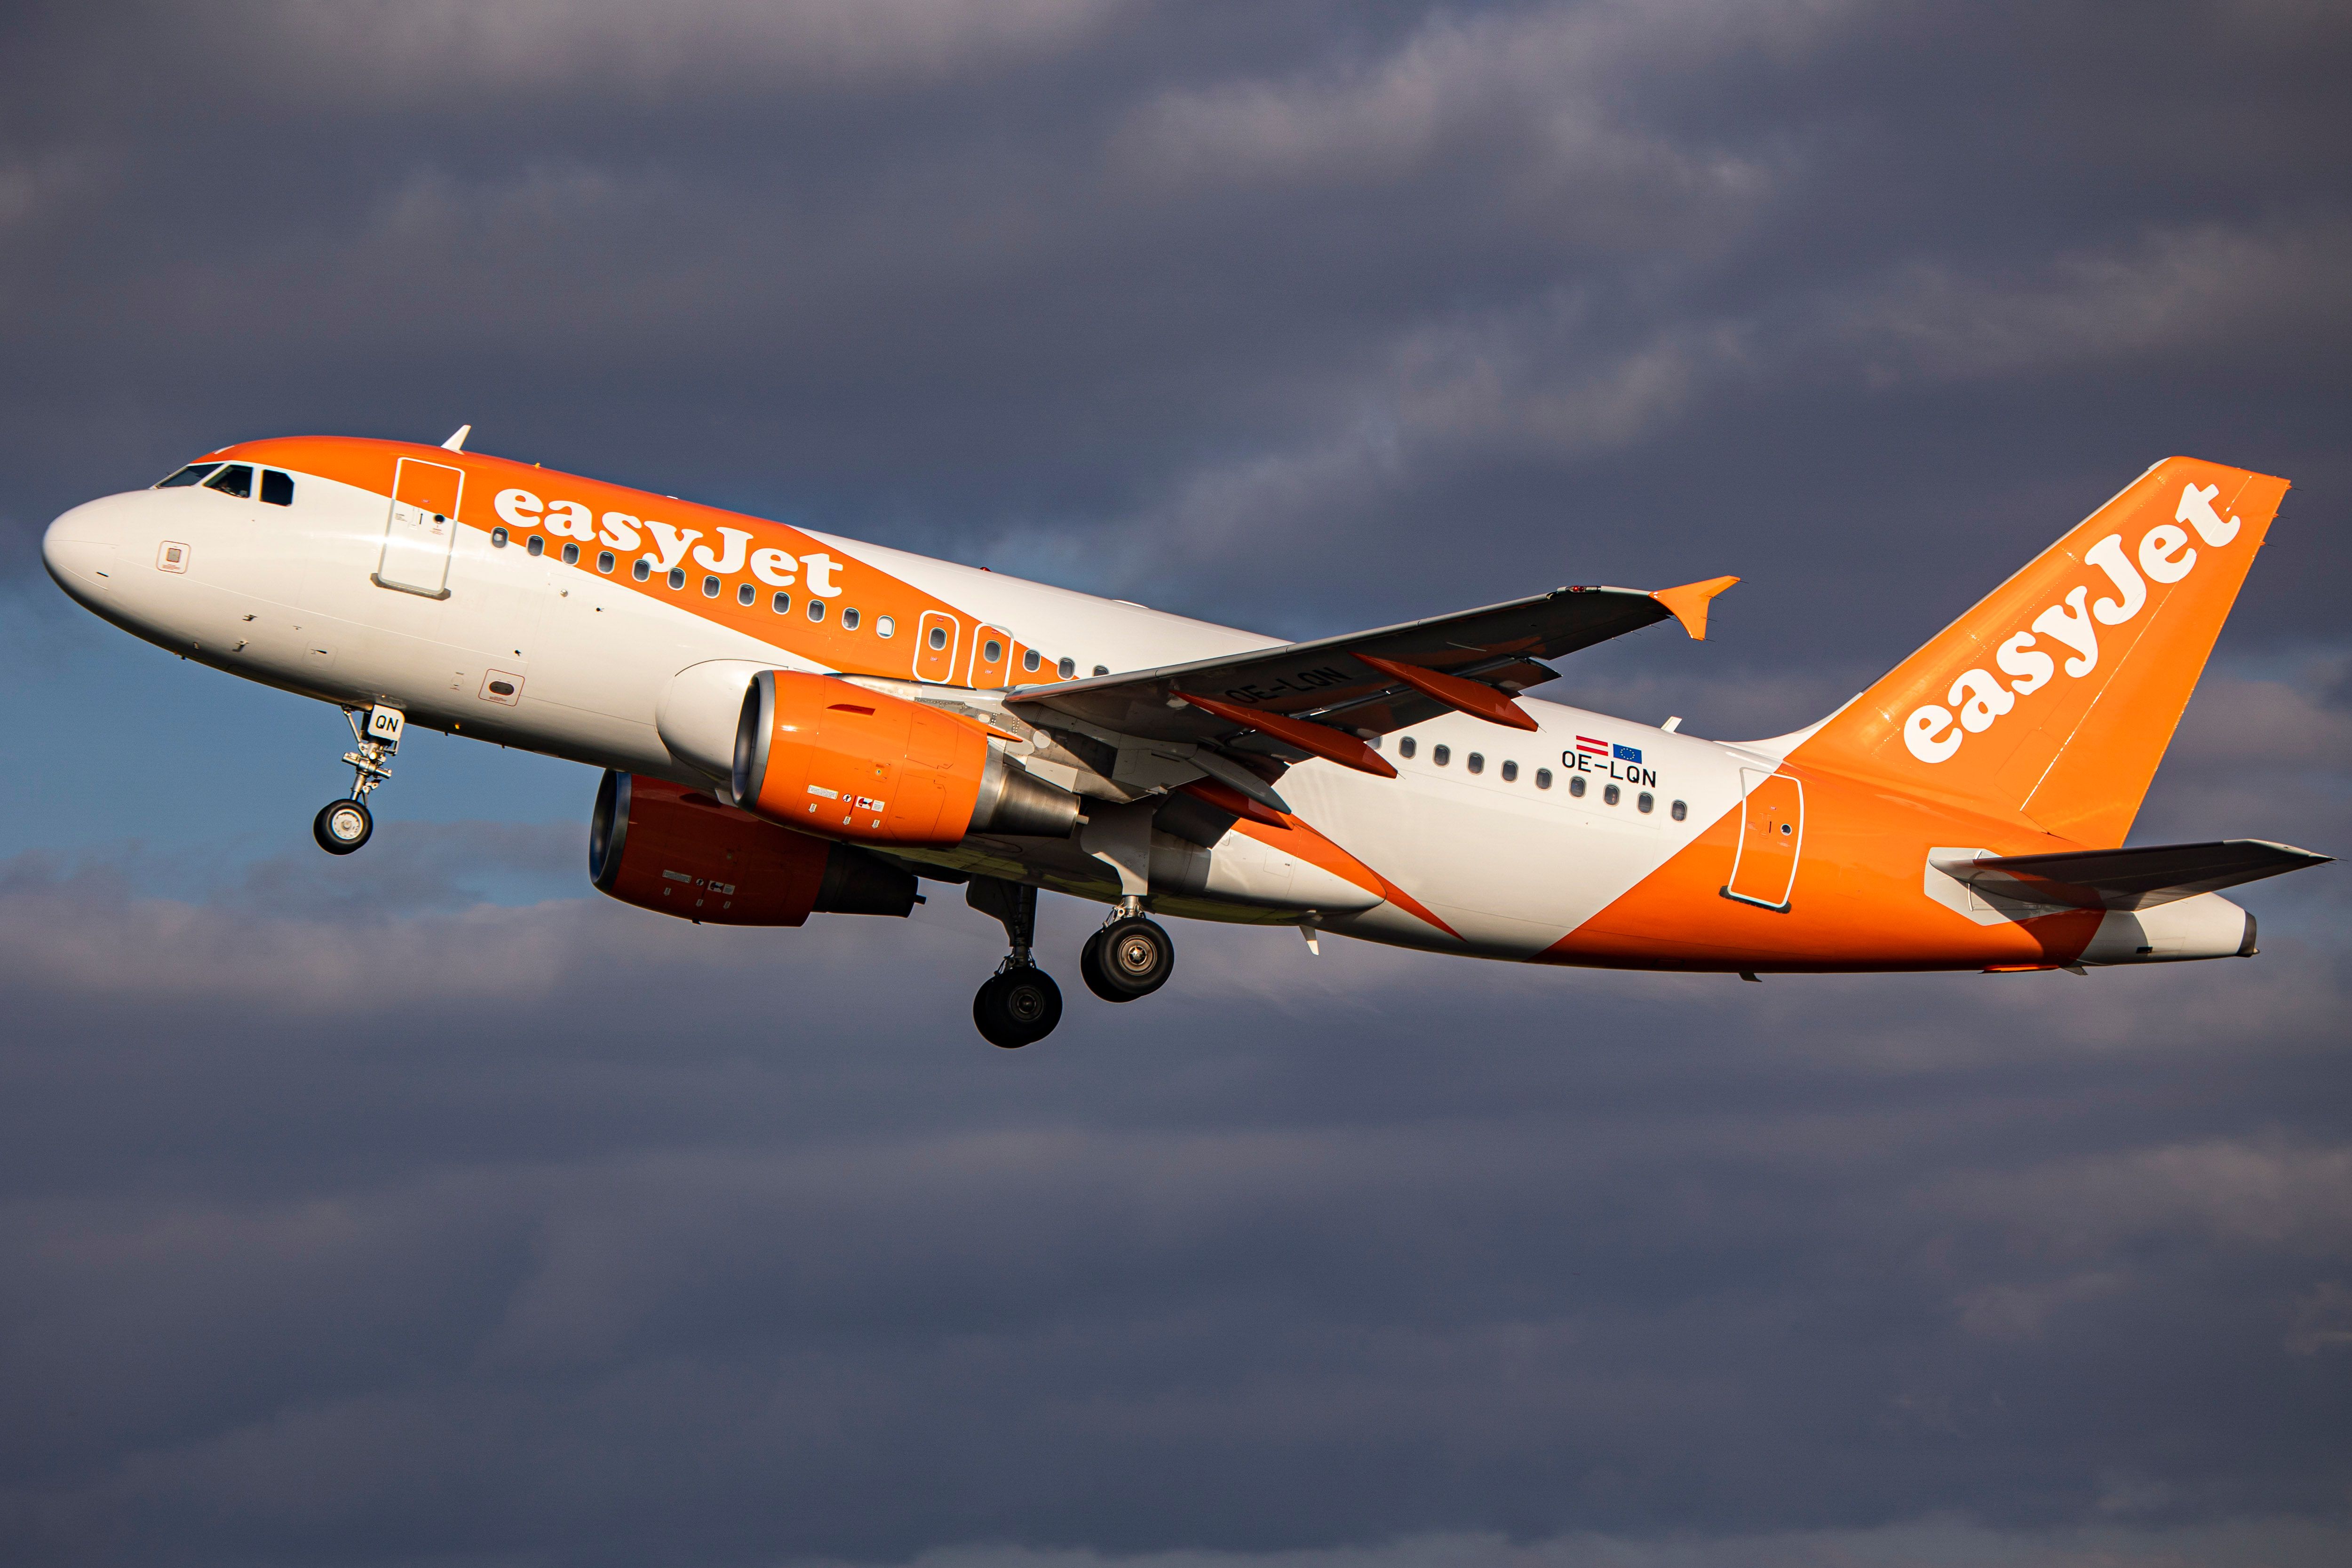 easyjet A319 taking off against cloudy sky